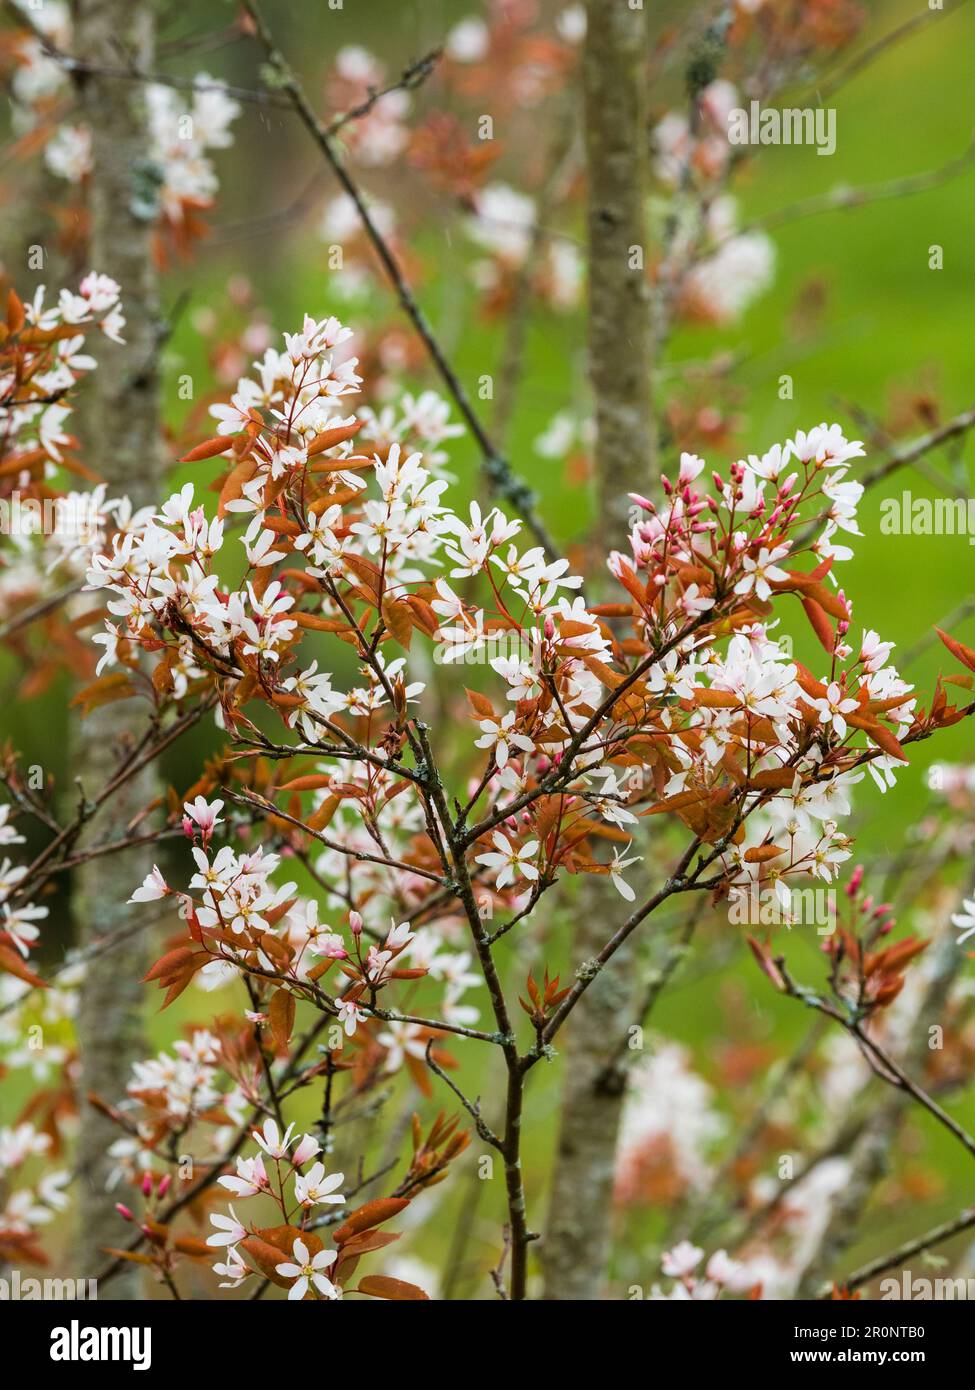 Bronze spring foliage and white flowers of the hardy serviceberry tree, Amelanchier x grandiflora 'Robin Hill' Stock Photo